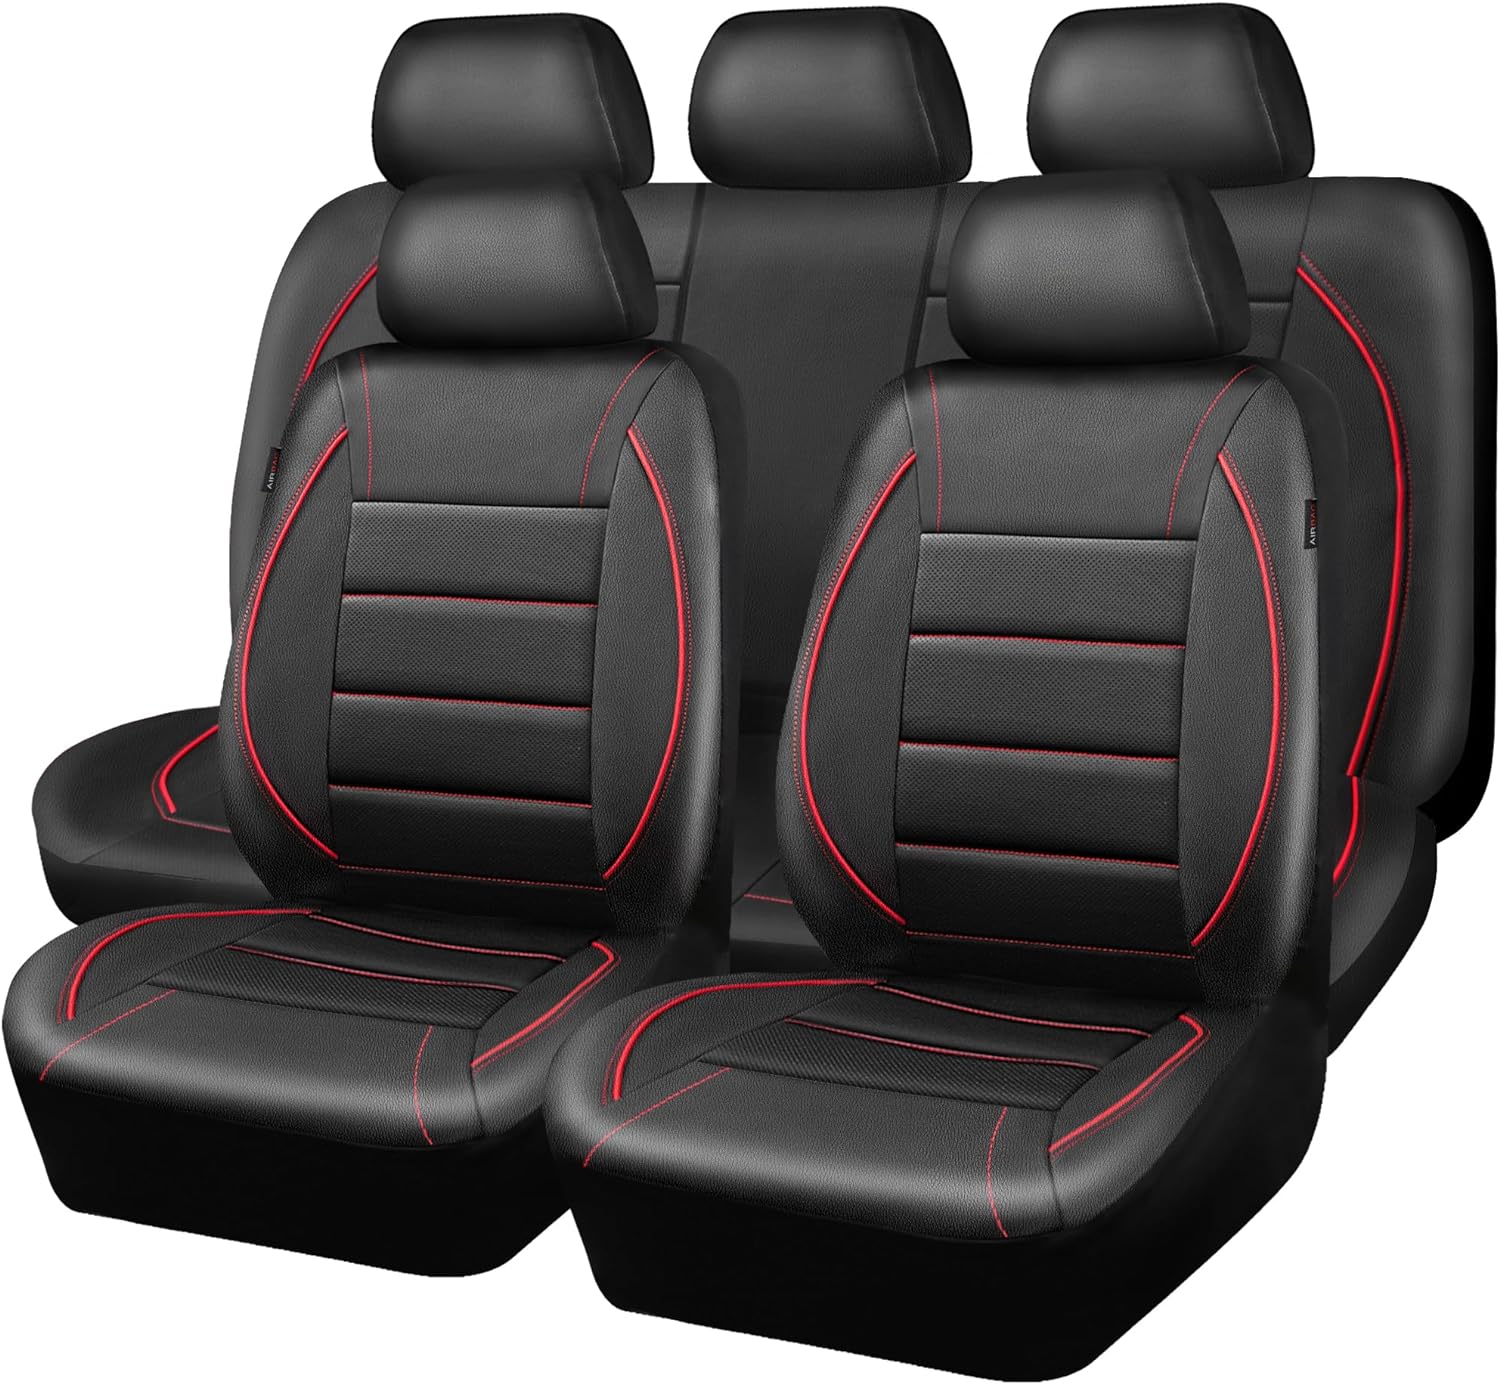 CAR PASS Universal FIT Piping Leather Car Seat Cover, for suvs,Van,Trucks,Airbag Compatible,Inside Zipper Design and Reserved Opening Holes (Full Set, Black and Red)